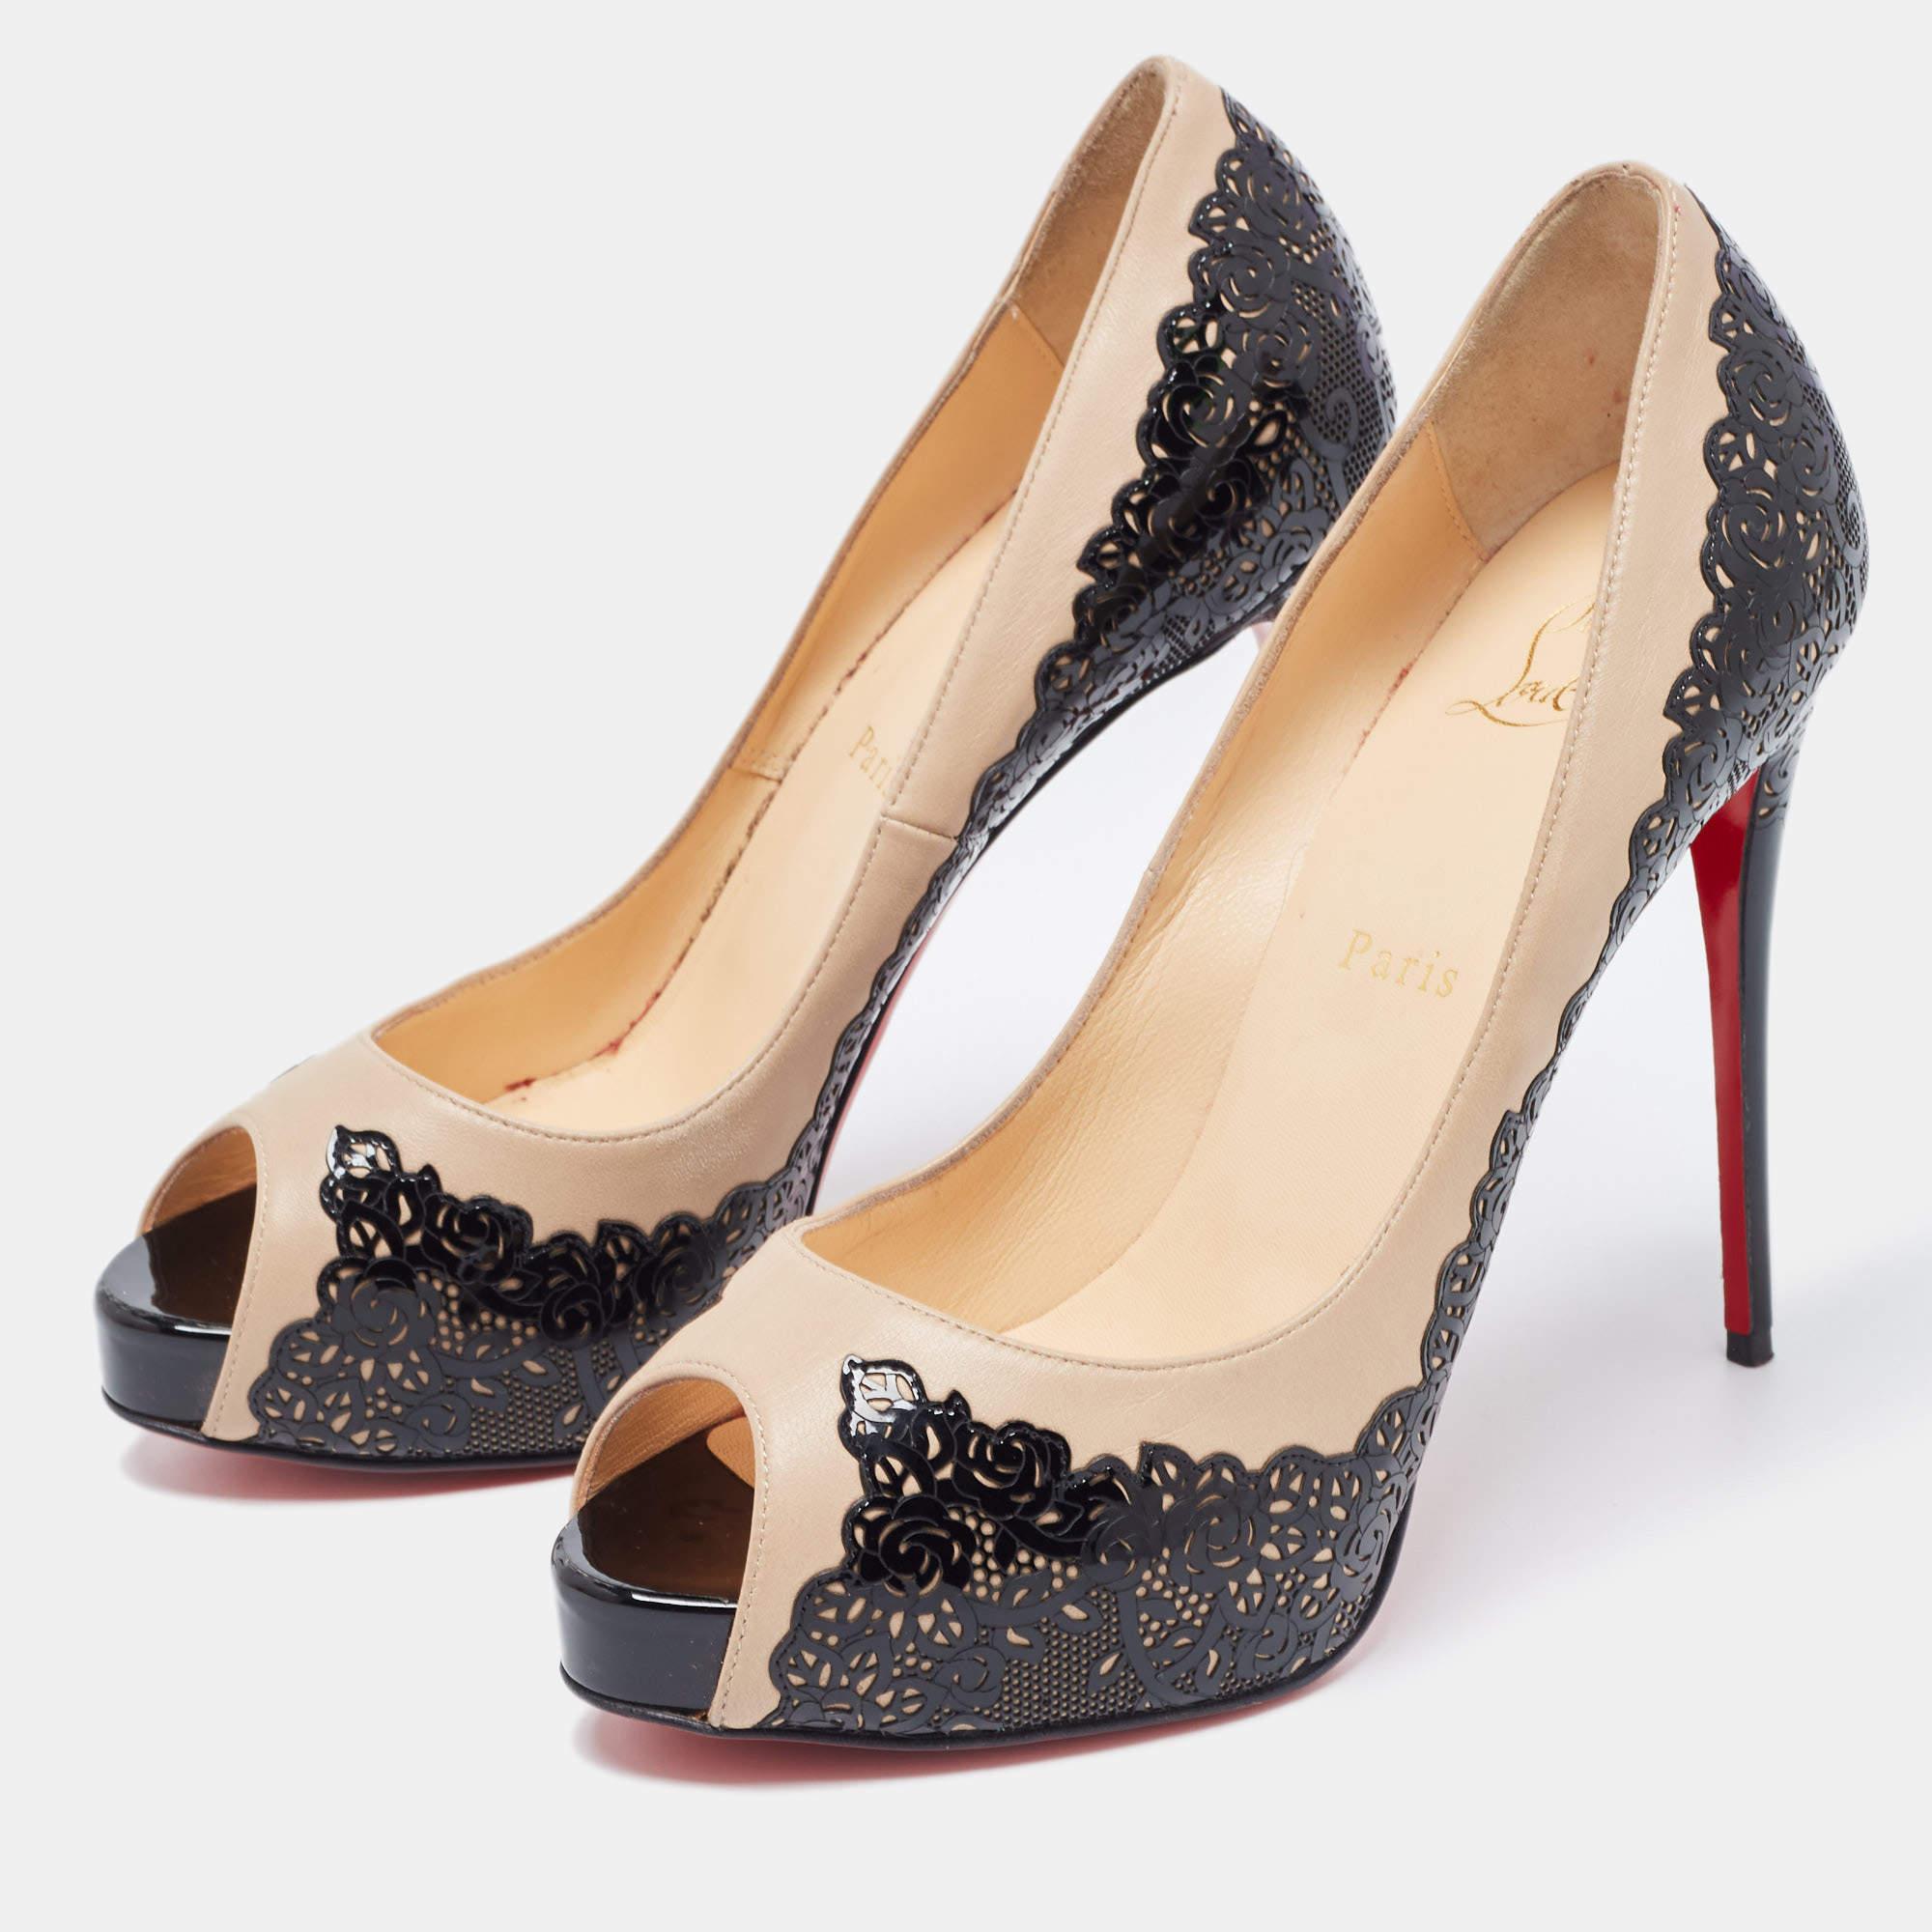 This gorgeous pair of Louboutins exudes high fashion with class. Crafted from two tone patent leather these Veramucha pumps feature peep toes and a laser cut lace exterior. Completed with leather lined insoles and stiletto heels these pumps will be